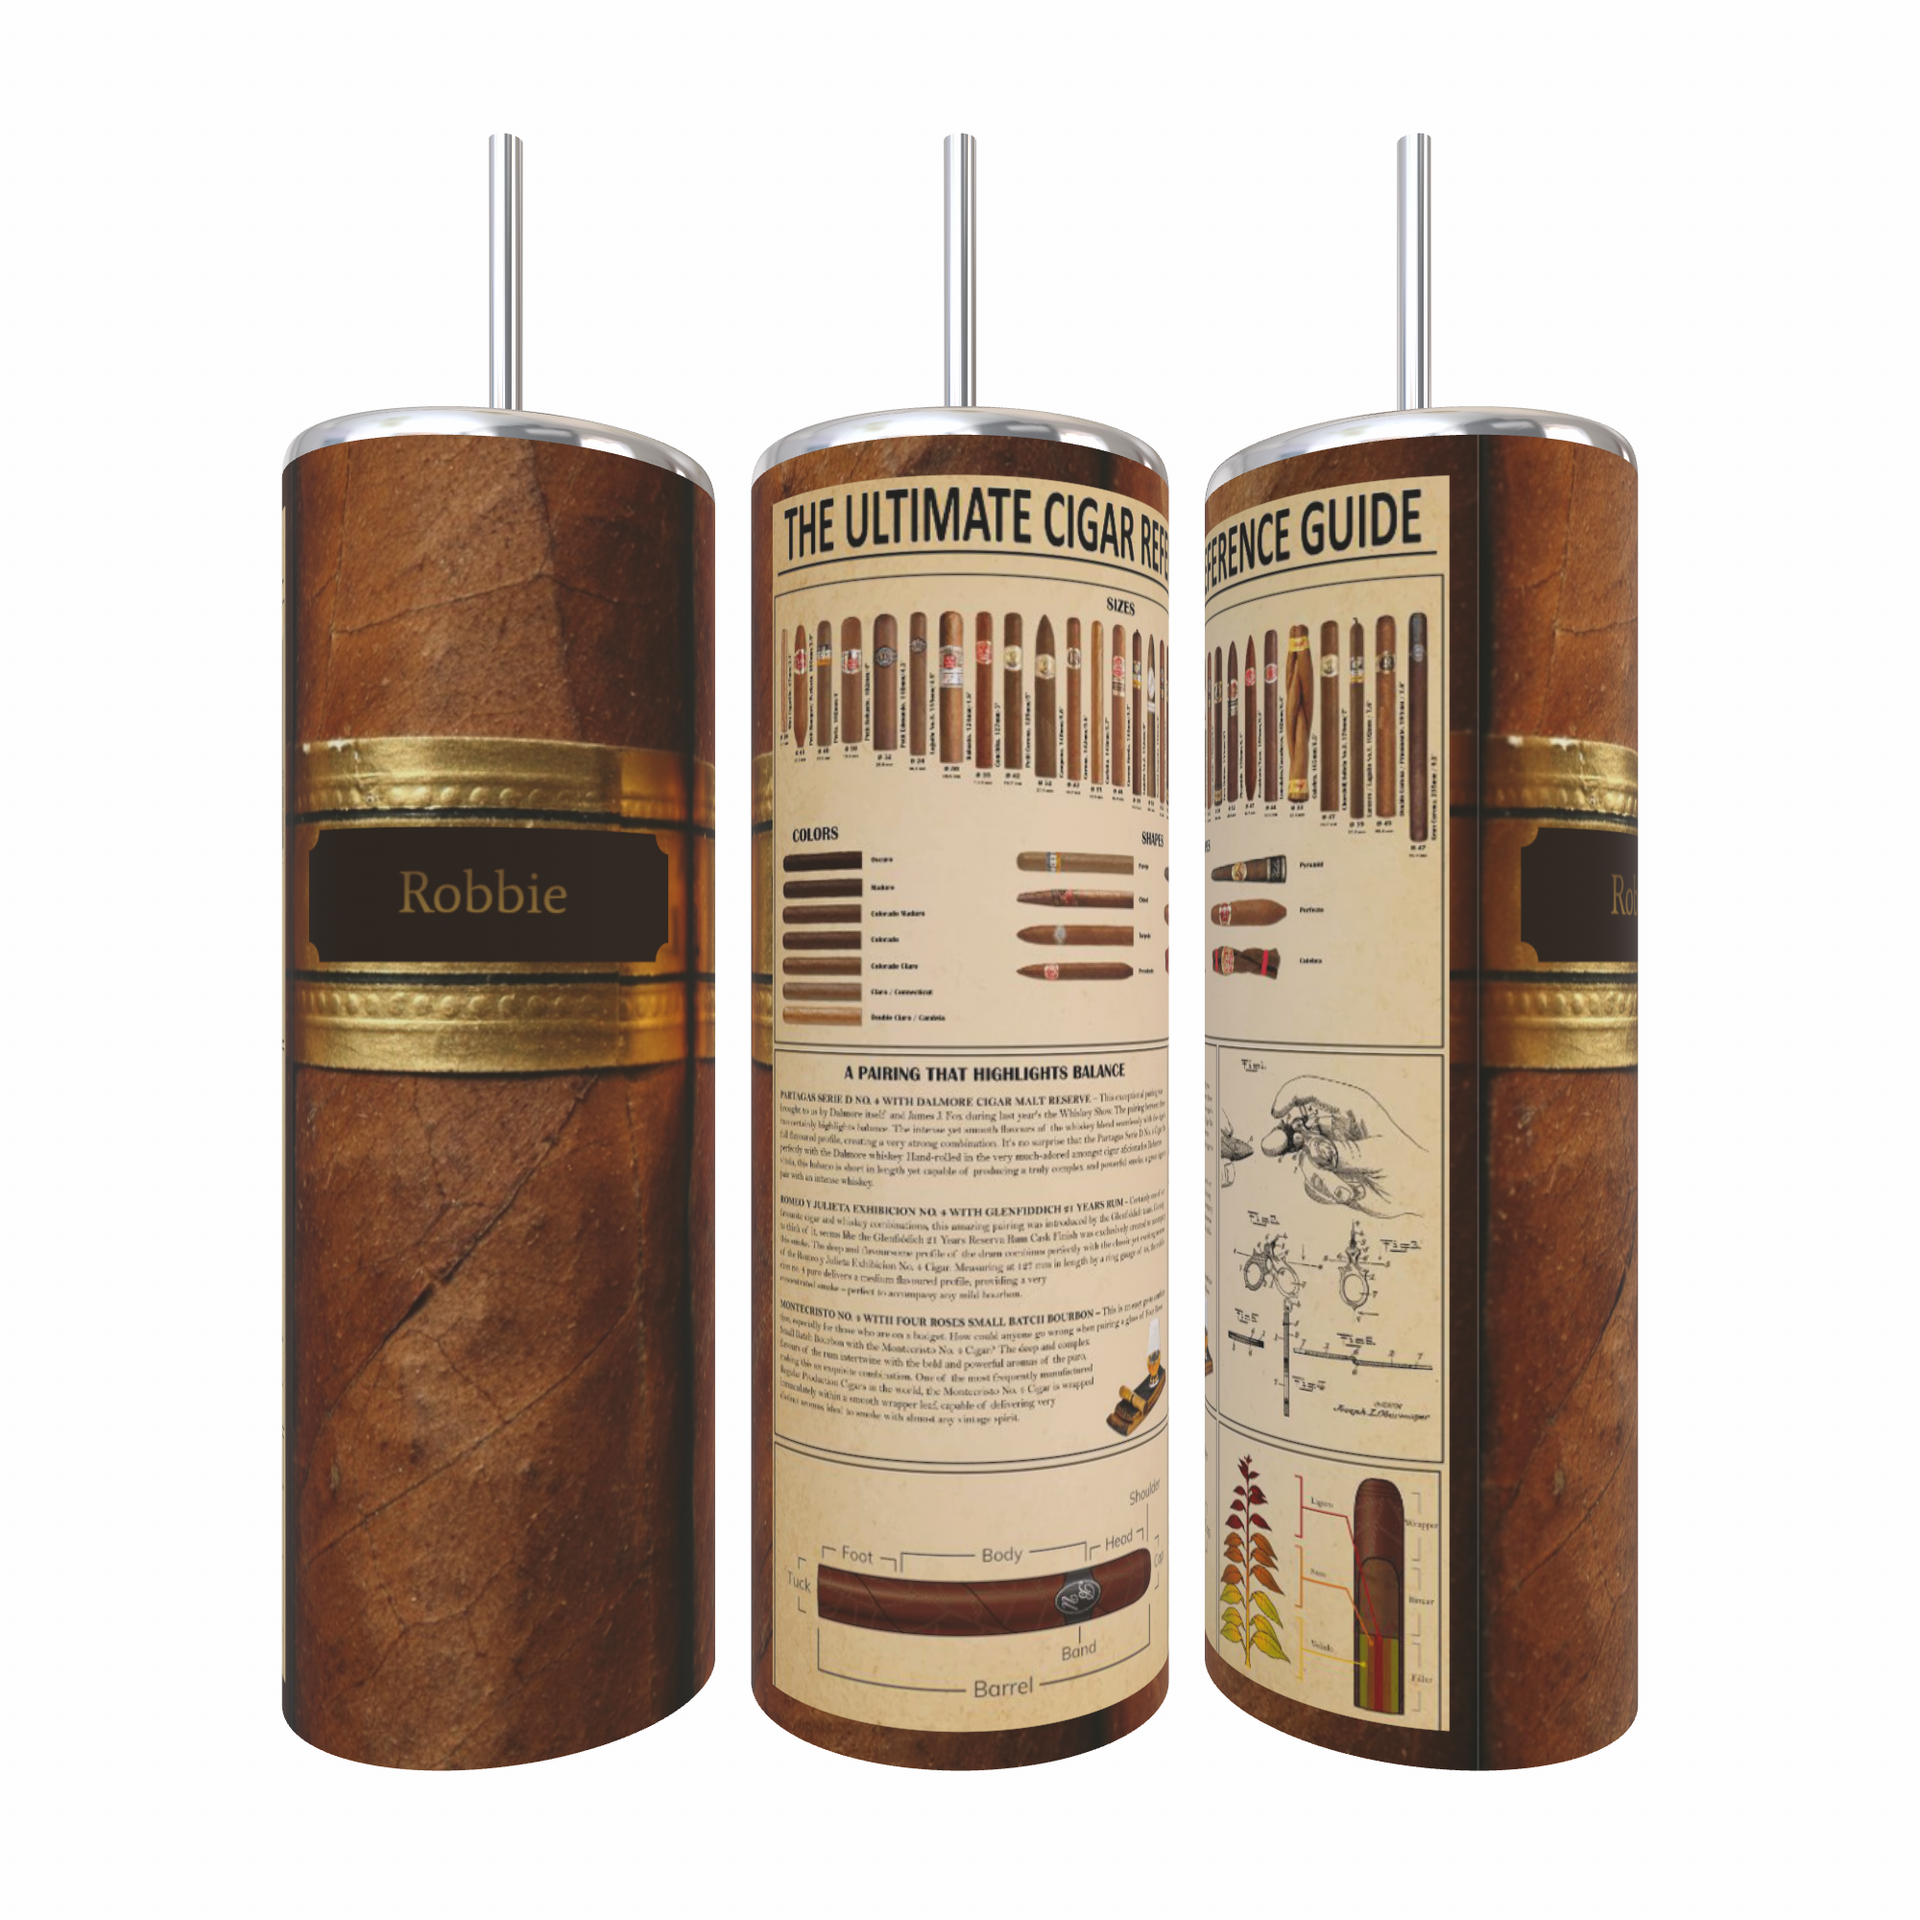 CIGAR TUBE - innovative tumblers, home design (planters) and